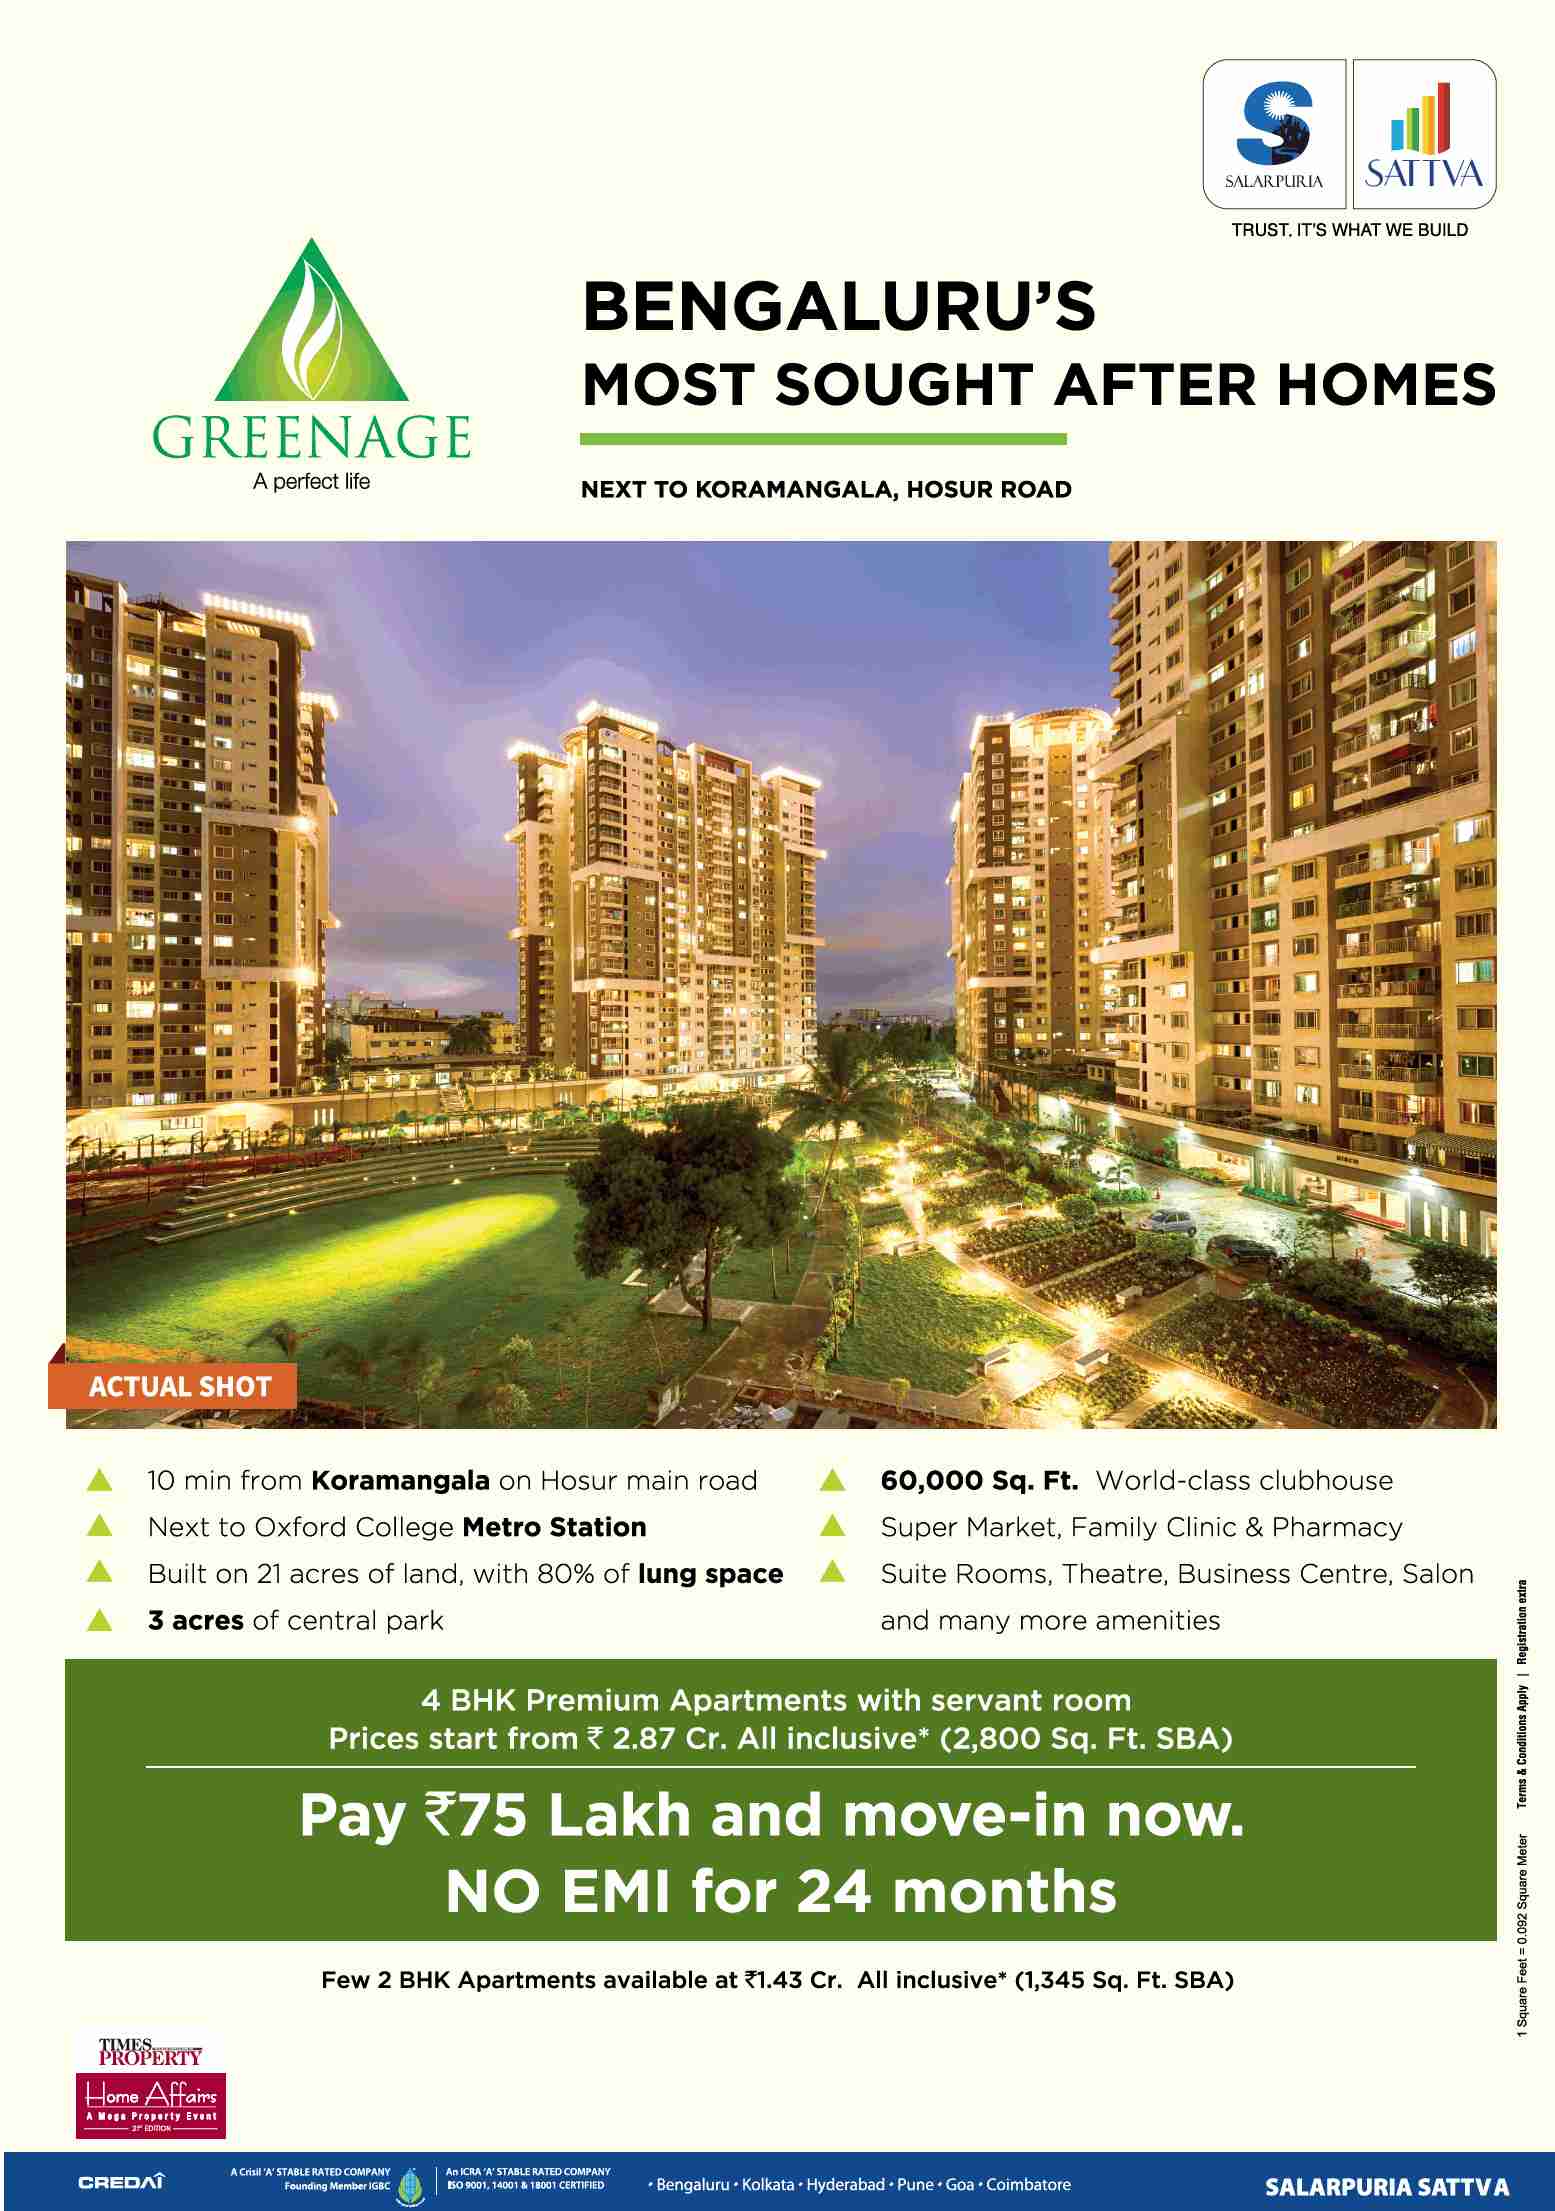 Pay Rs 75 Lakh & move in now with no EMI for 24 months at Salarpuria Sattva Greenage in Bangalore